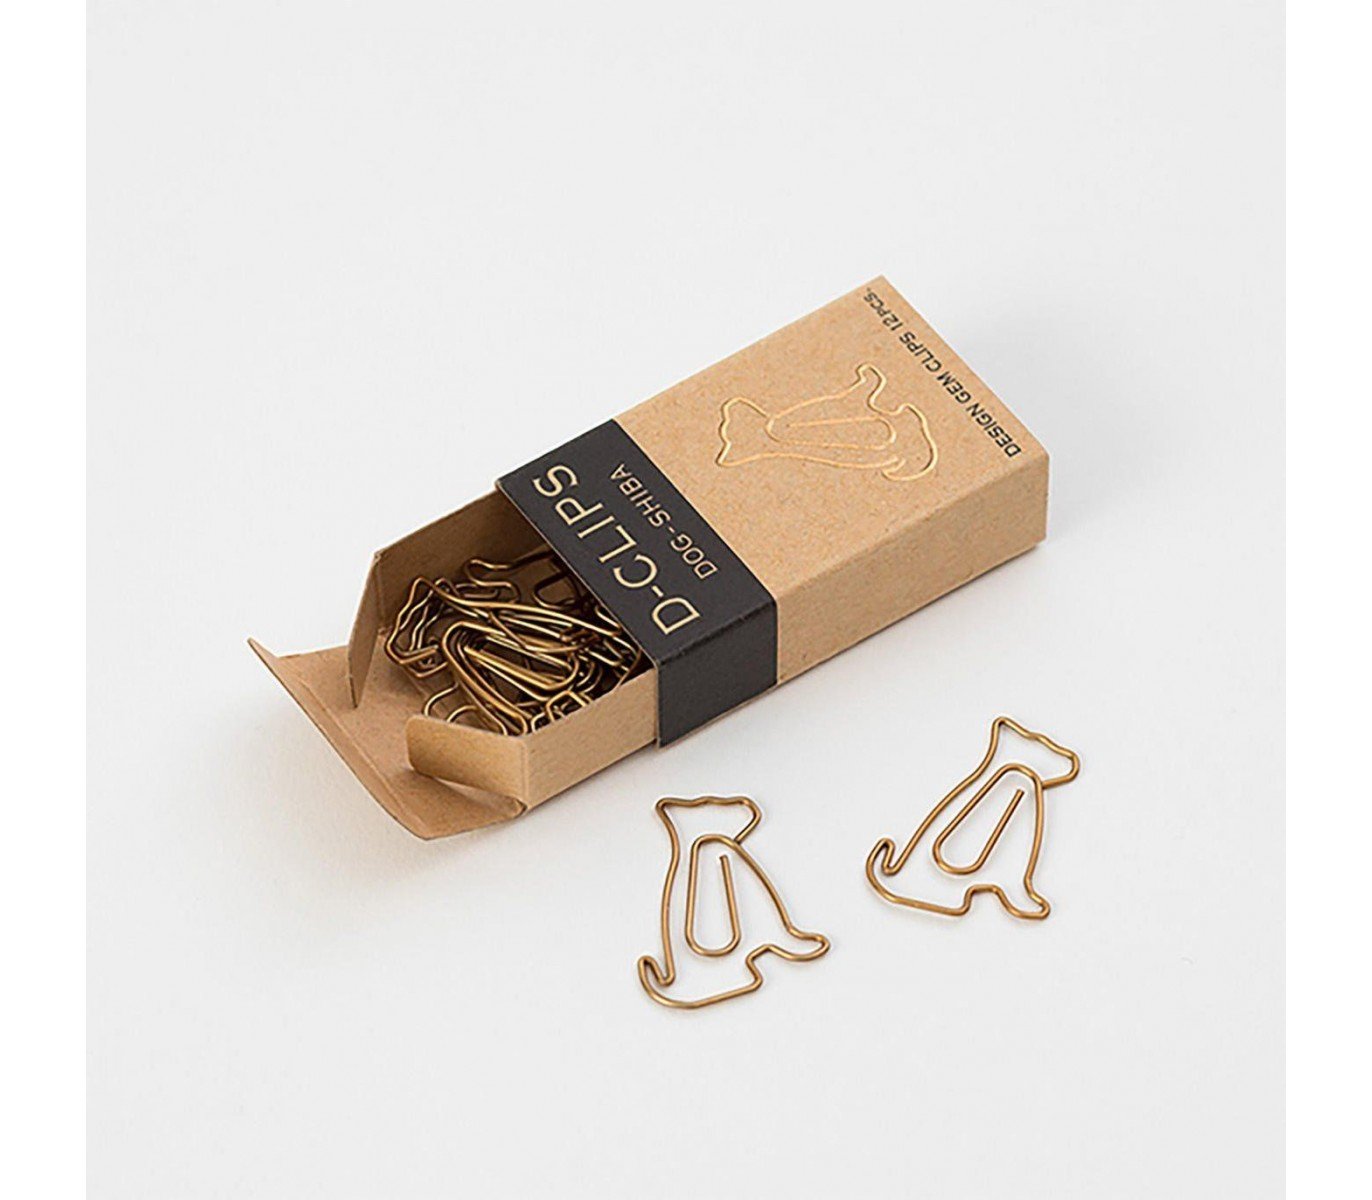 Box of paper clips in the shape of Dogs, from the japanese stationery brand Midori.